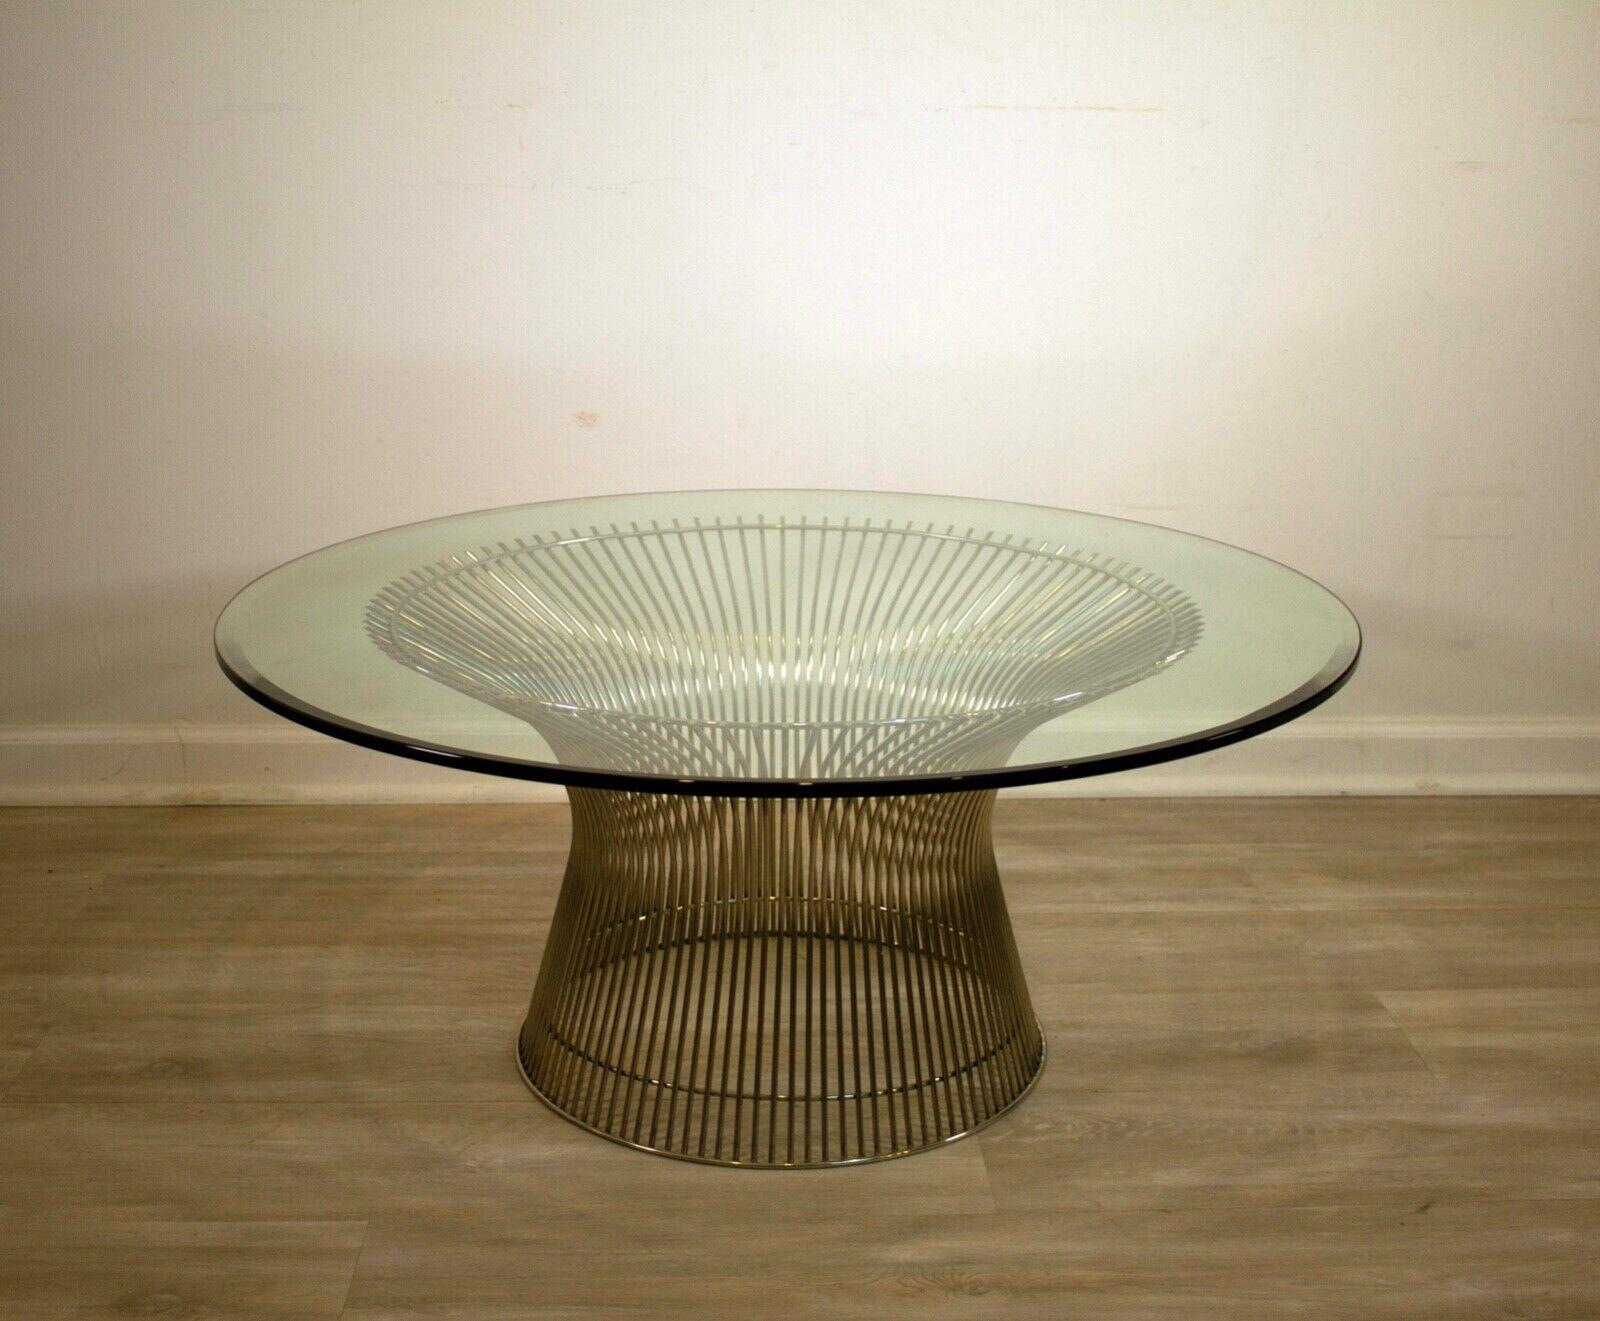 This Warren platner coffee table, a classic piece of Mid-Century Modern furniture, is up for sale. The sleek, Minimalist design of this table is a great addition to any Mid-Century Modern home. The chrome plated base and glass top allows it to blend